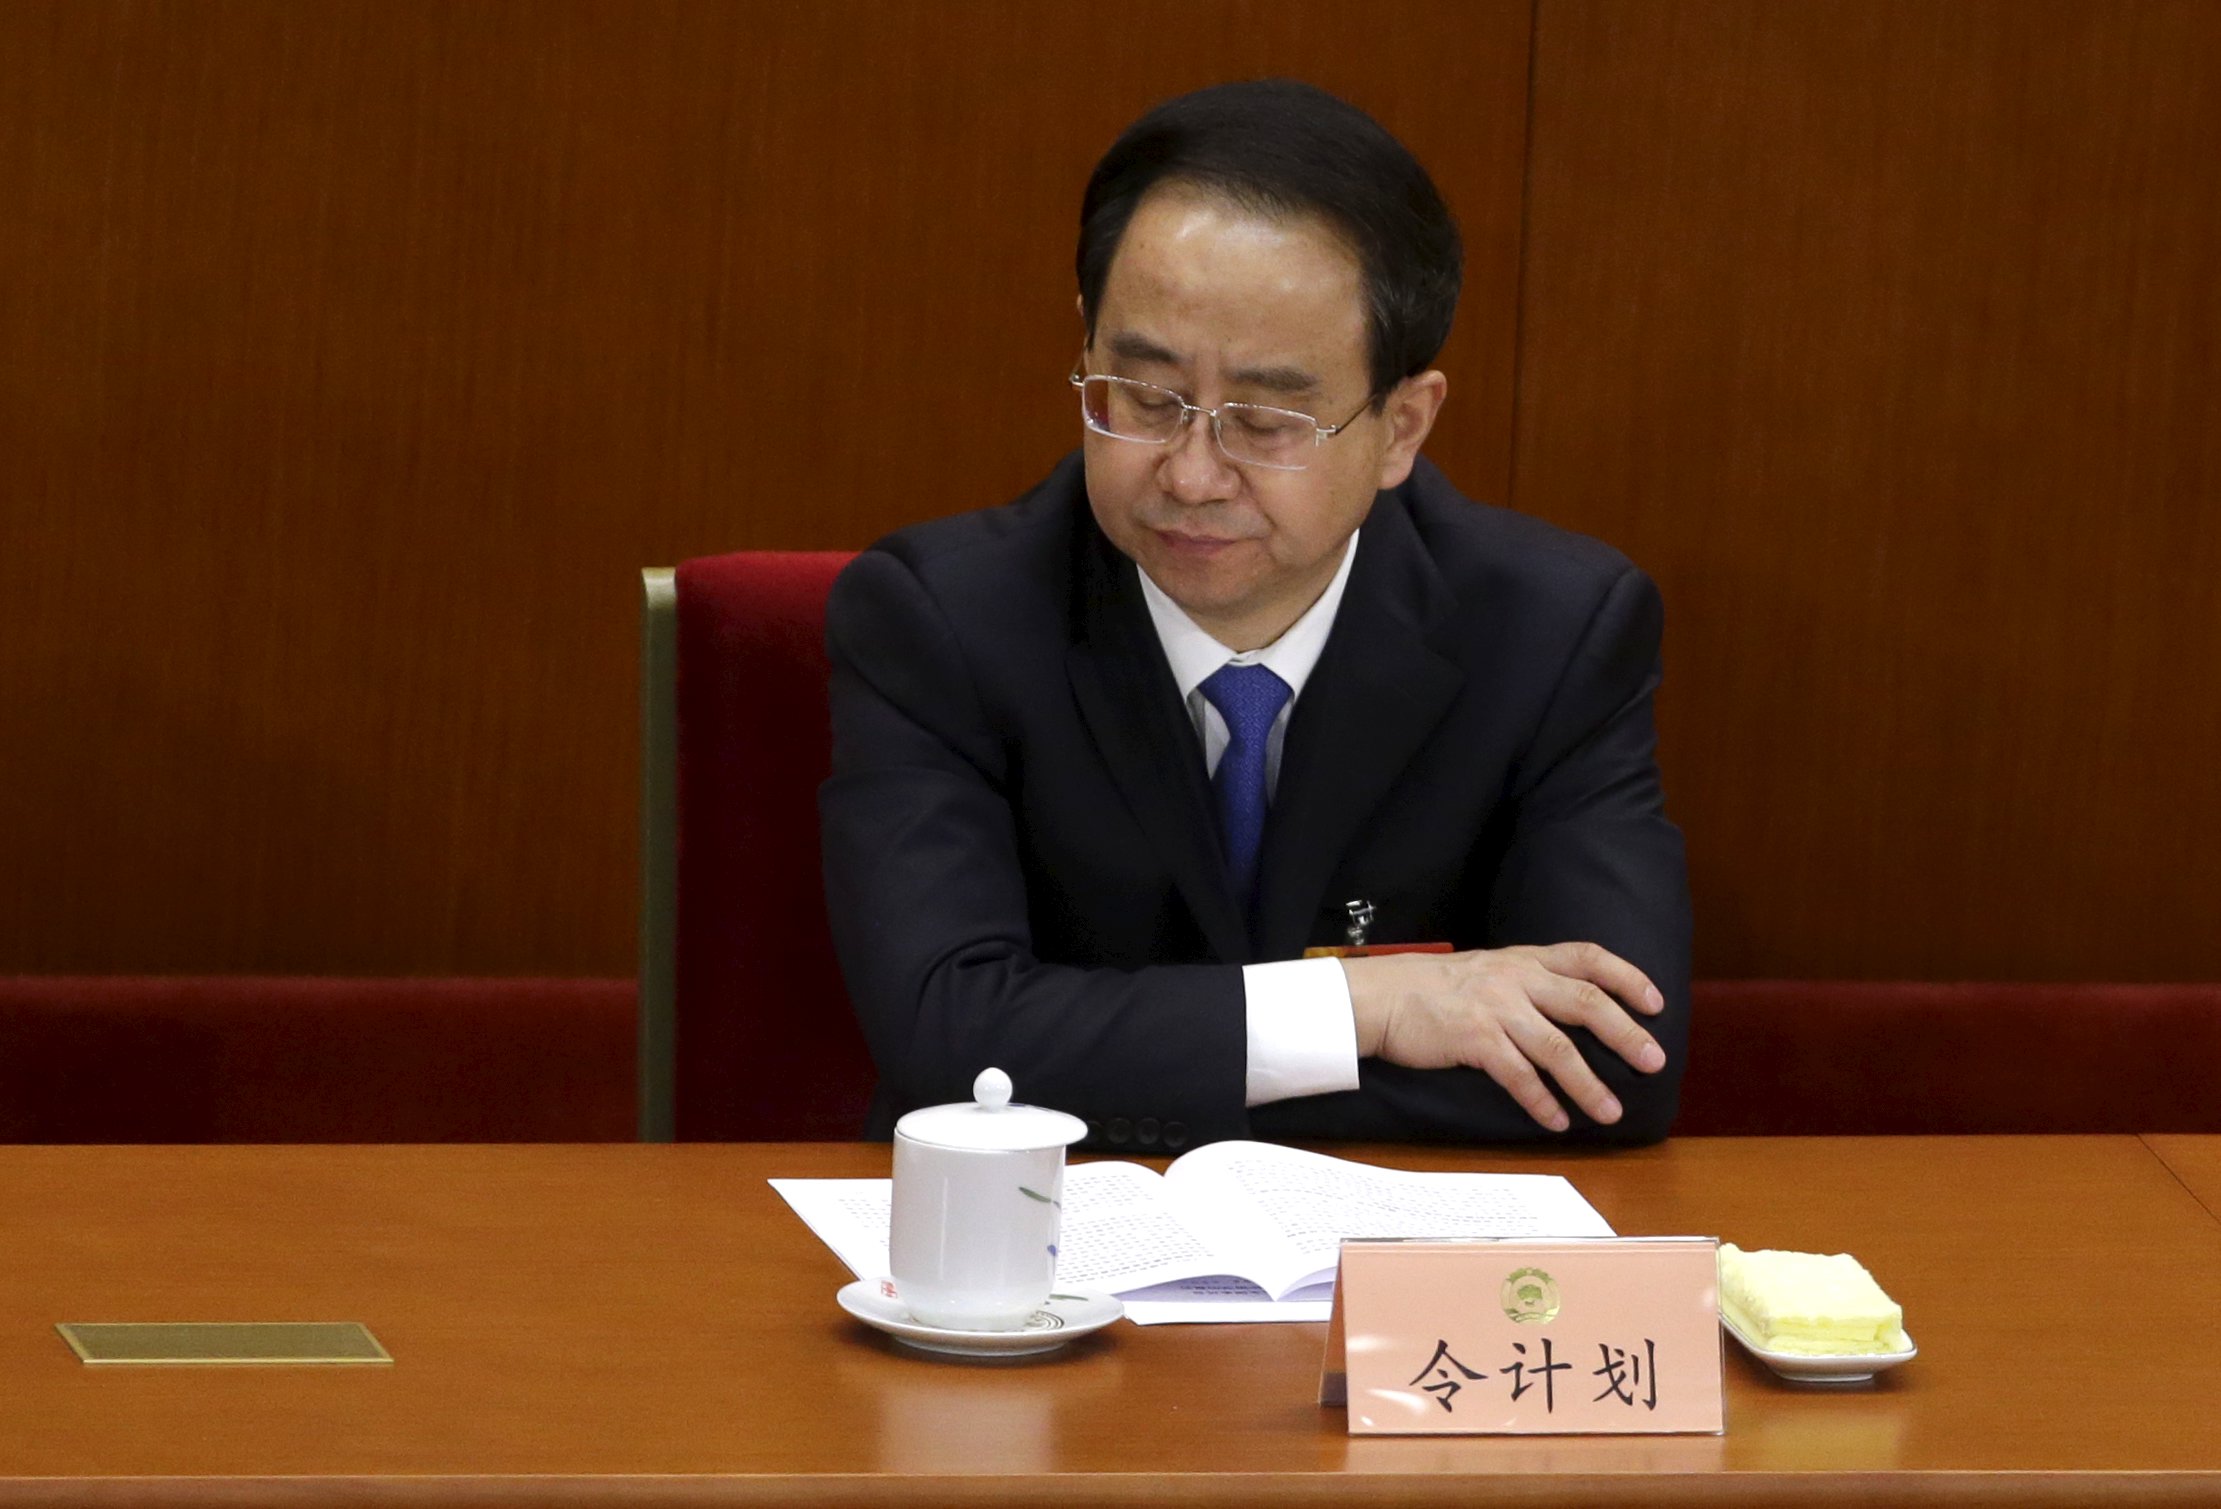 Ling Jihua, former top aide to ex-president Hu Jintao, apparently suffered a nervous breakdown. Photo: Reuters